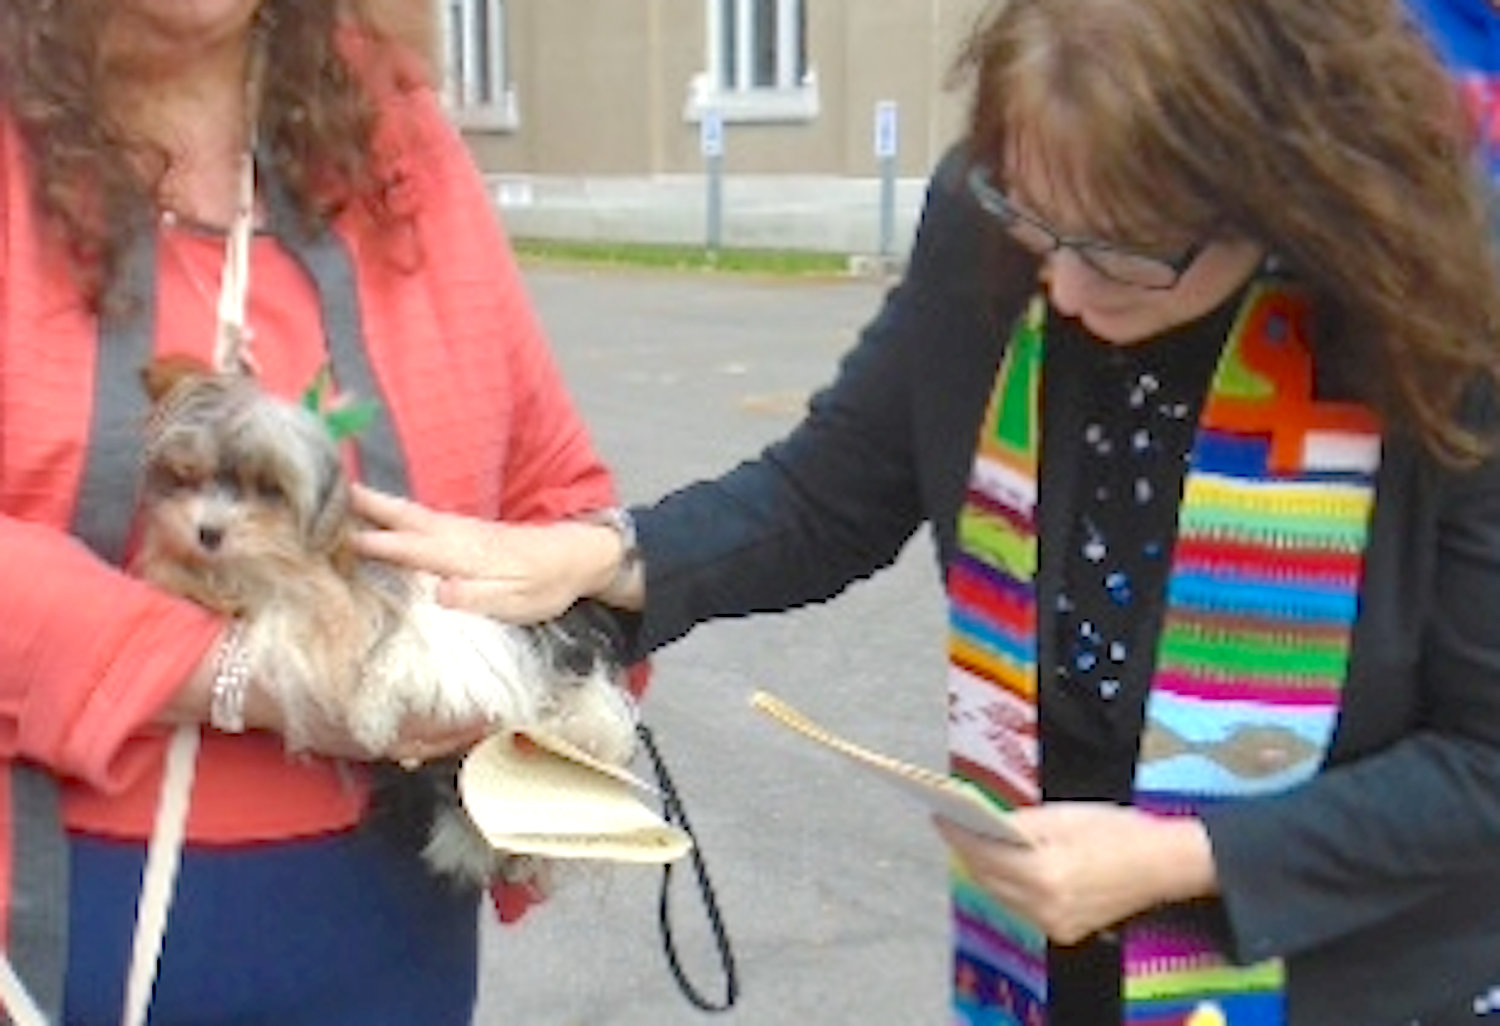 Rev. Edwina Landry offers a prayer to a pet from the community in last season’s “Blessing of the Animals.”